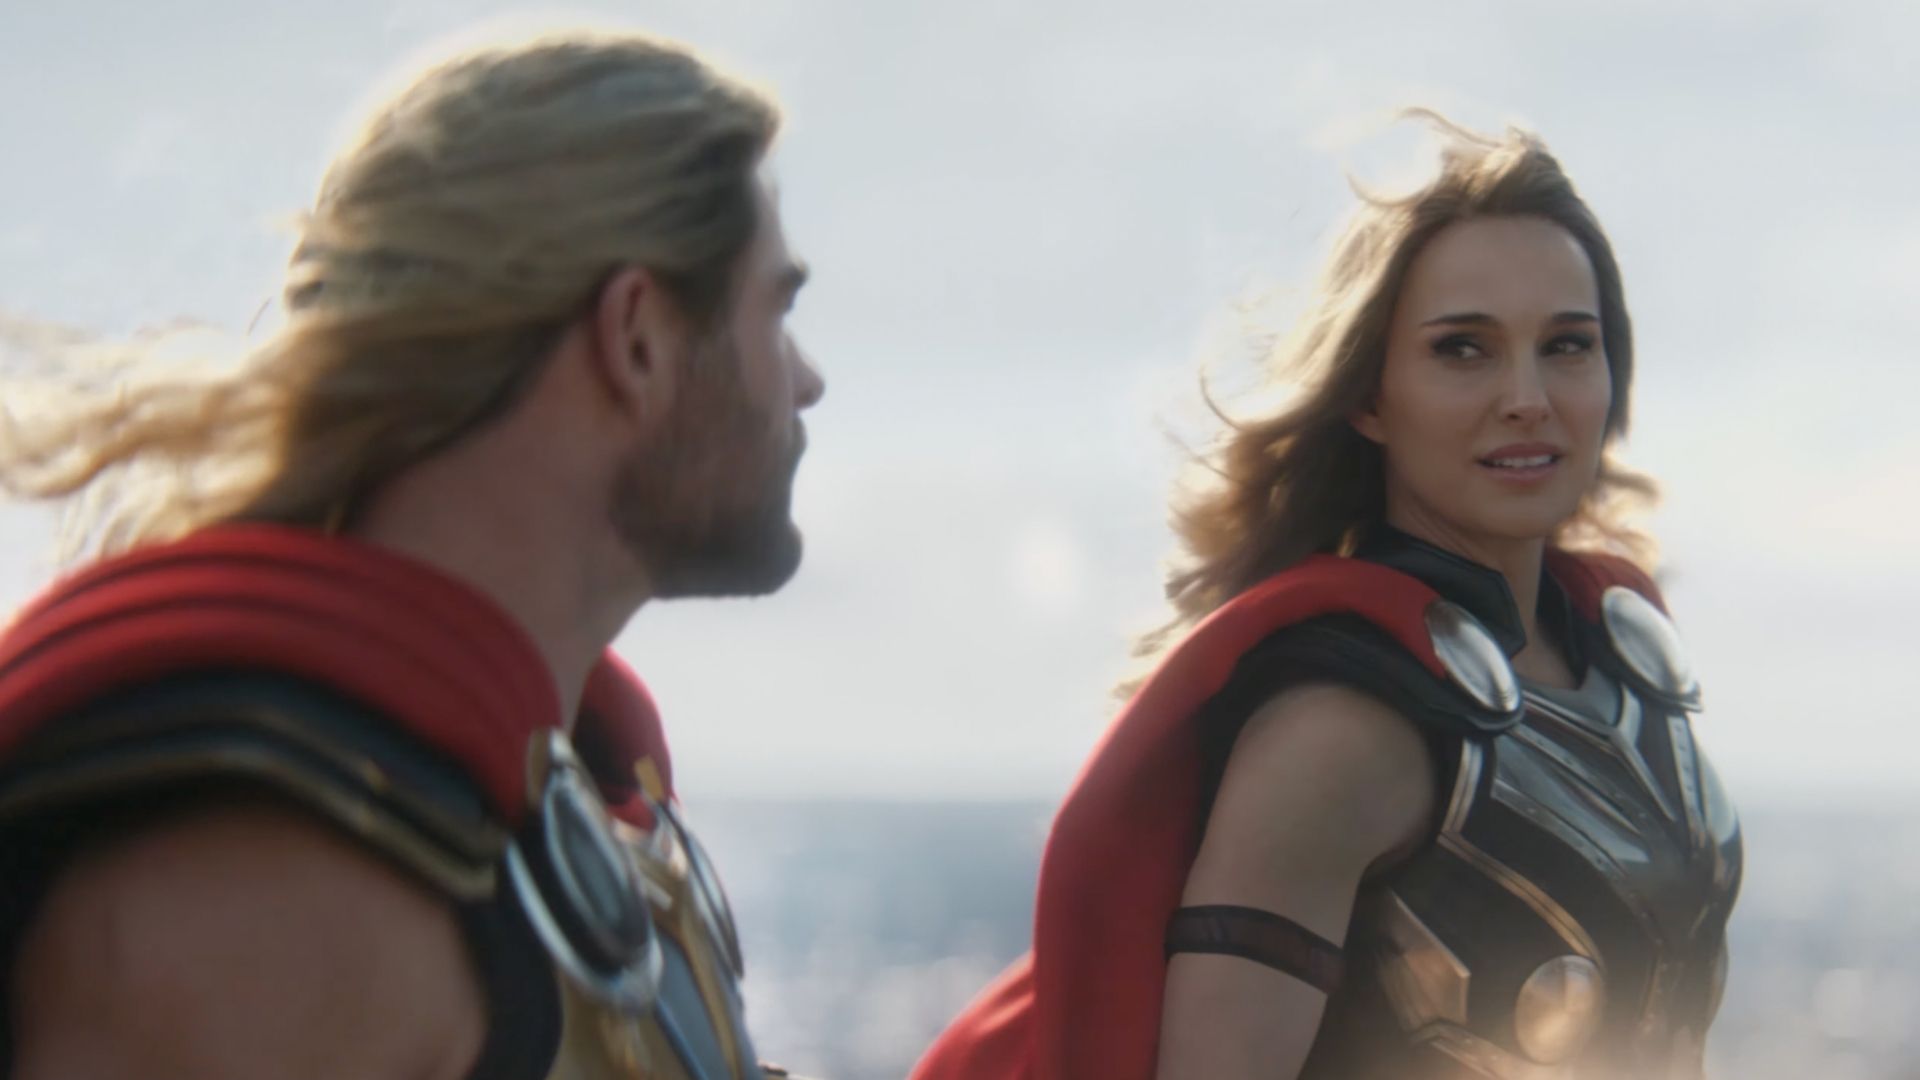 Natalie Portman is more badass than ever in new images from Thor: Love and Thunder